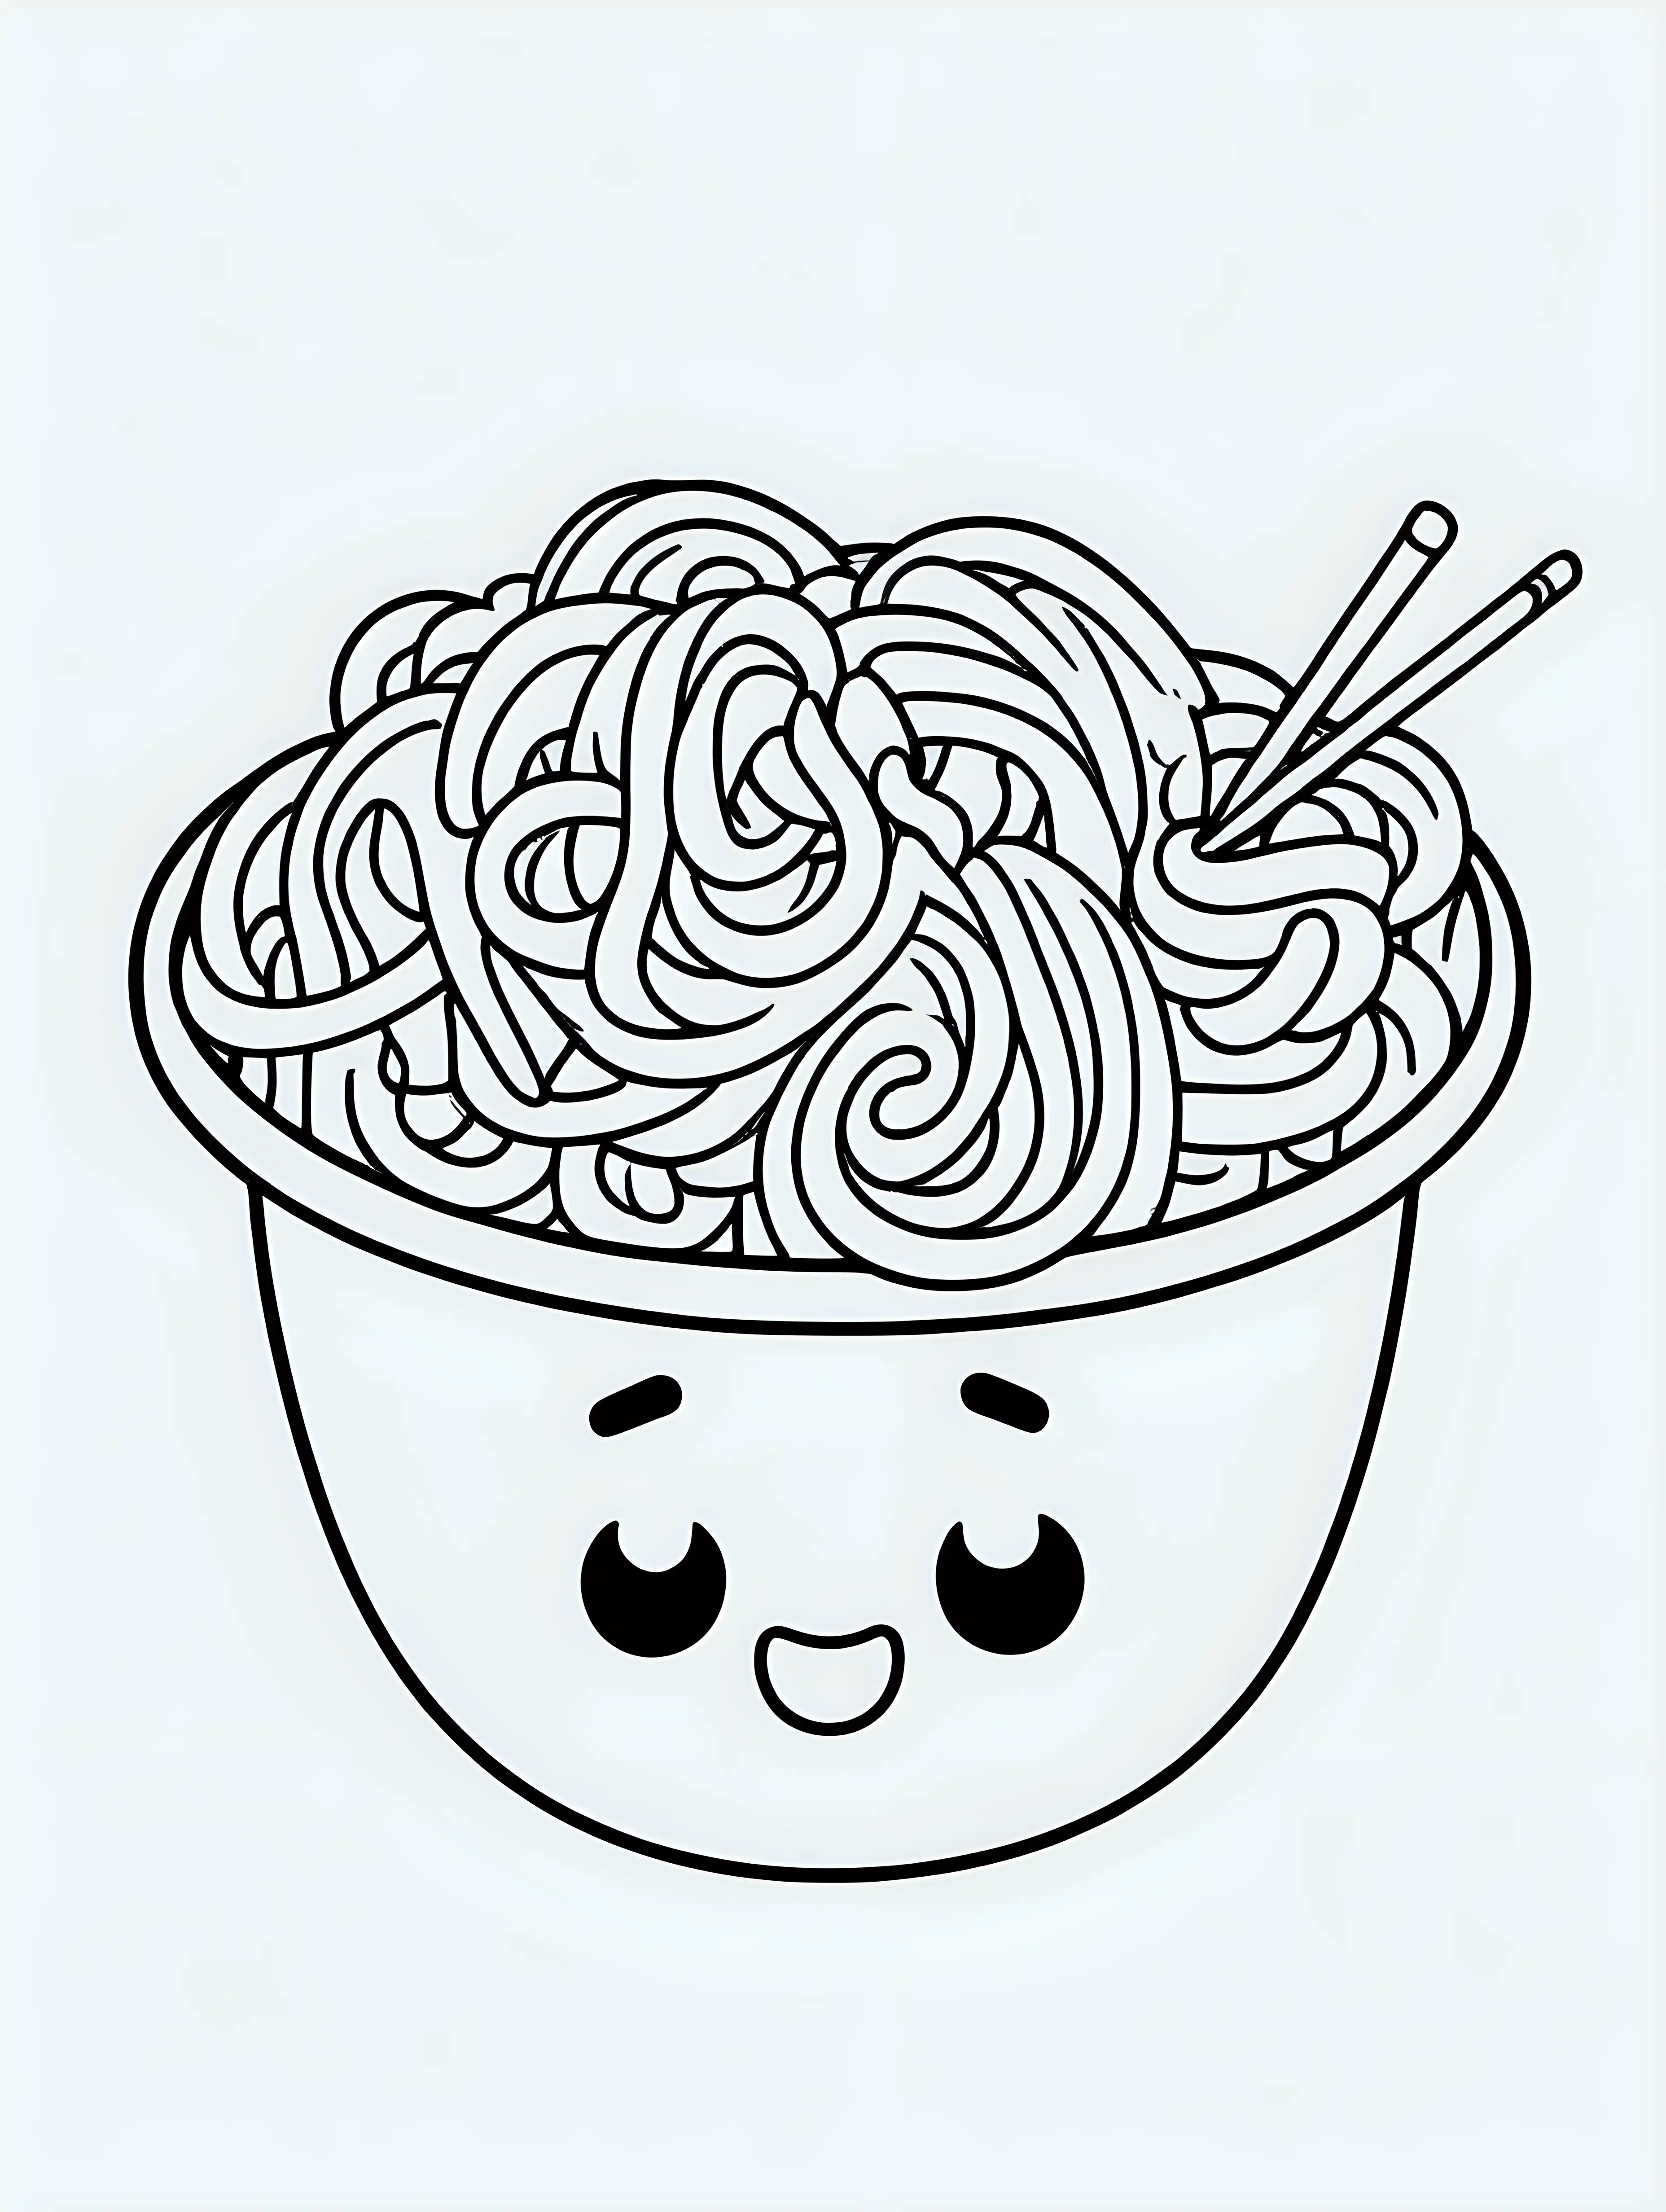 Cute Noodle Characters Coloring Book Whimsical Cartoon Drawings on Clean Black and White Pages with Emojis